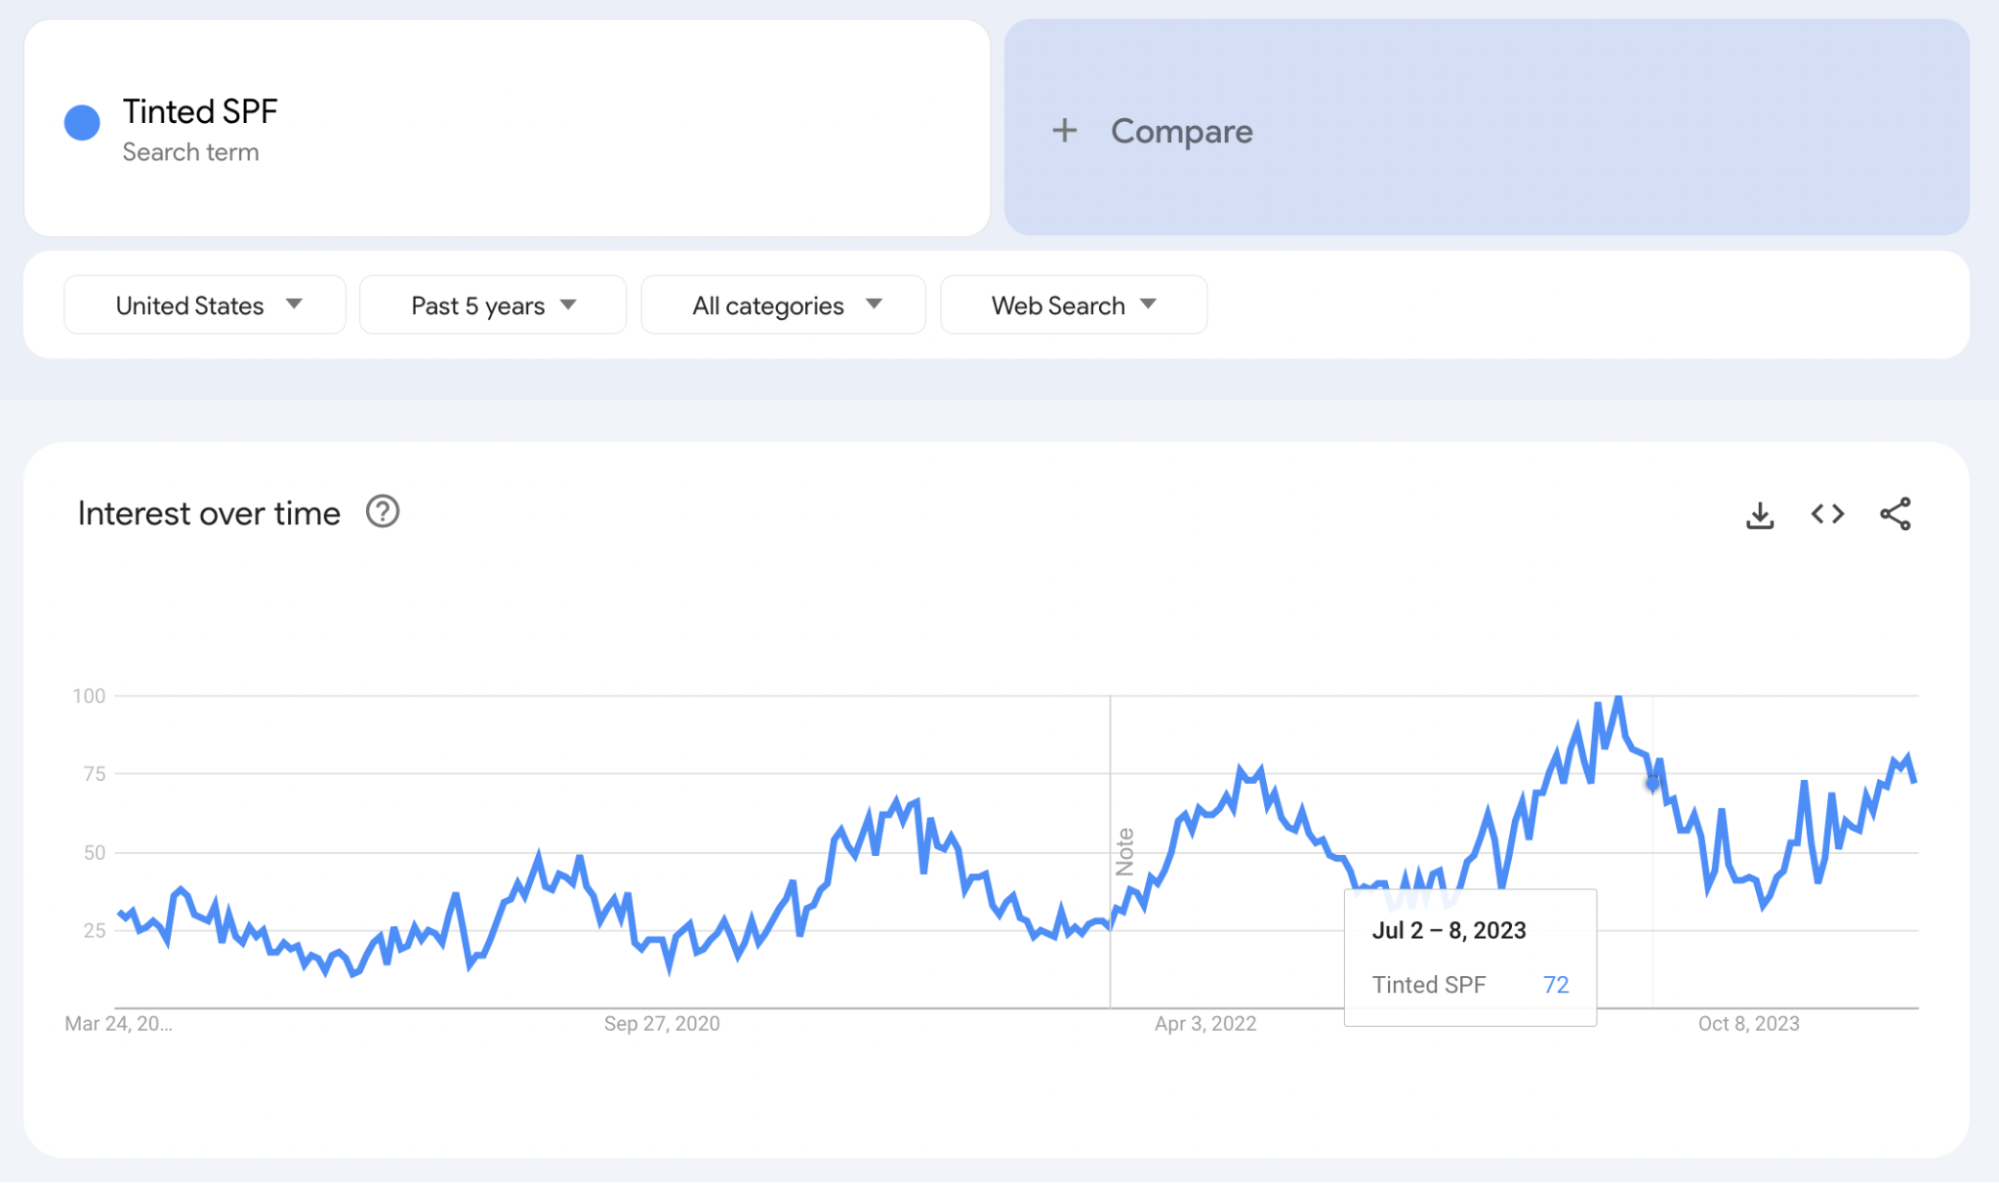 Google Trends report for “tinted SPF”.